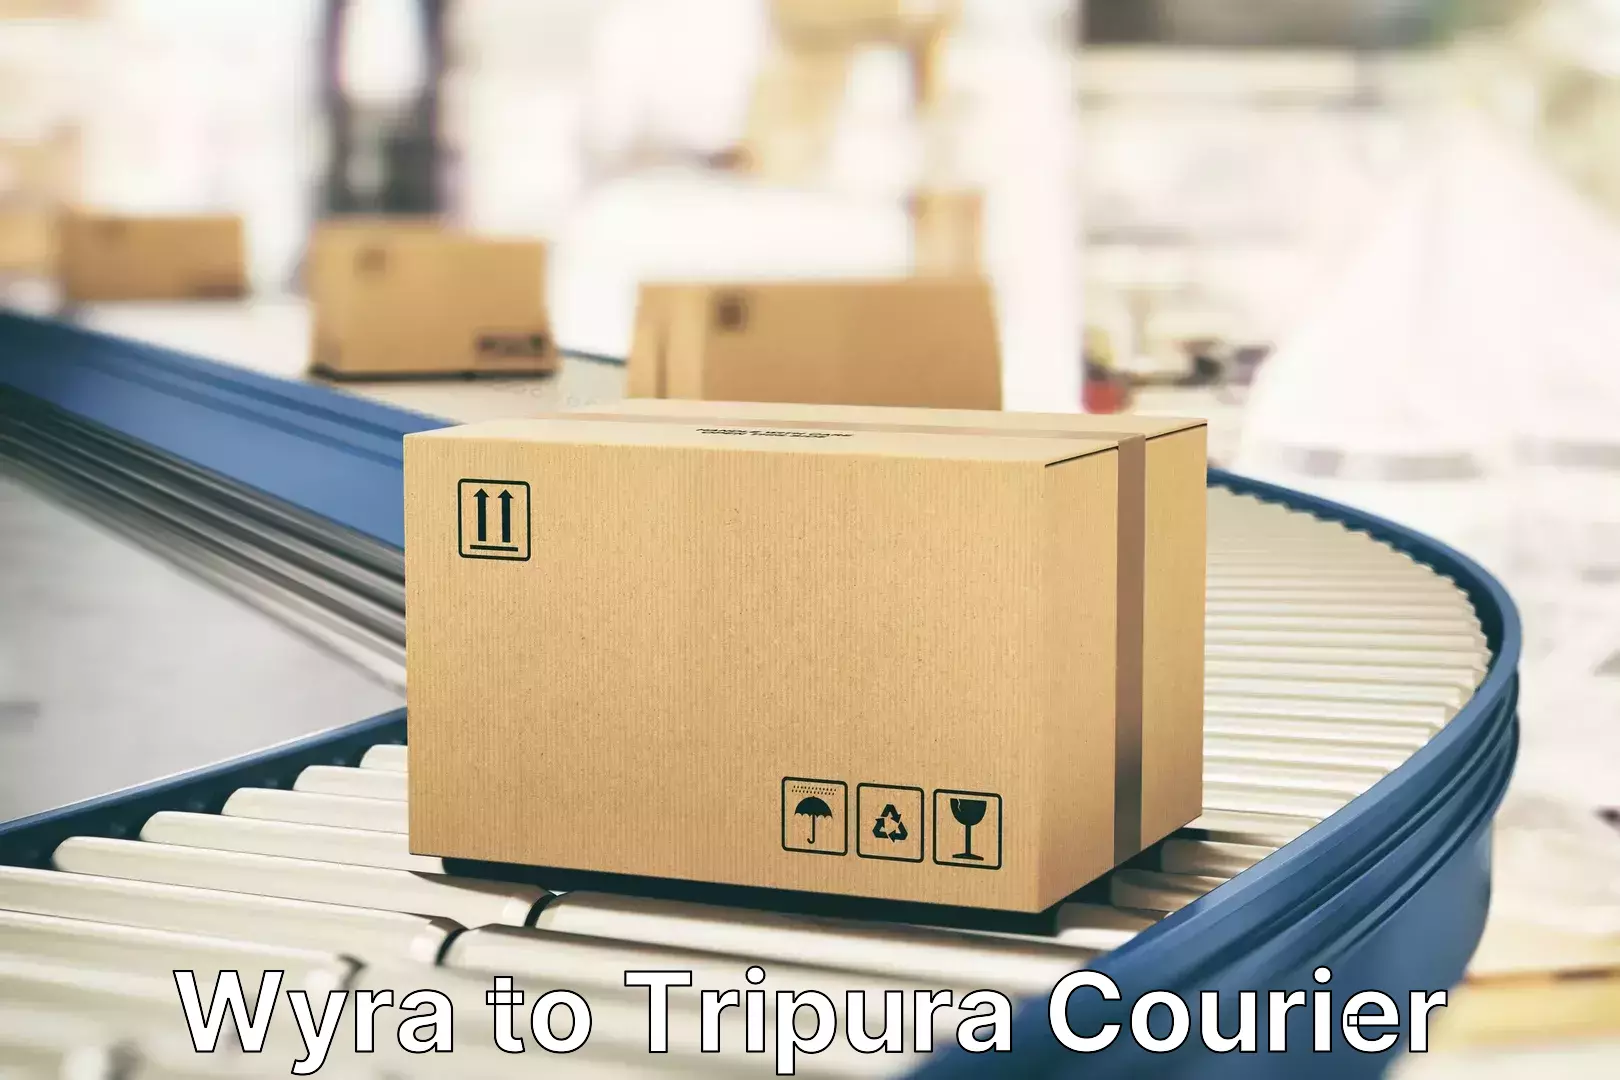 Luggage transport consulting Wyra to Tripura